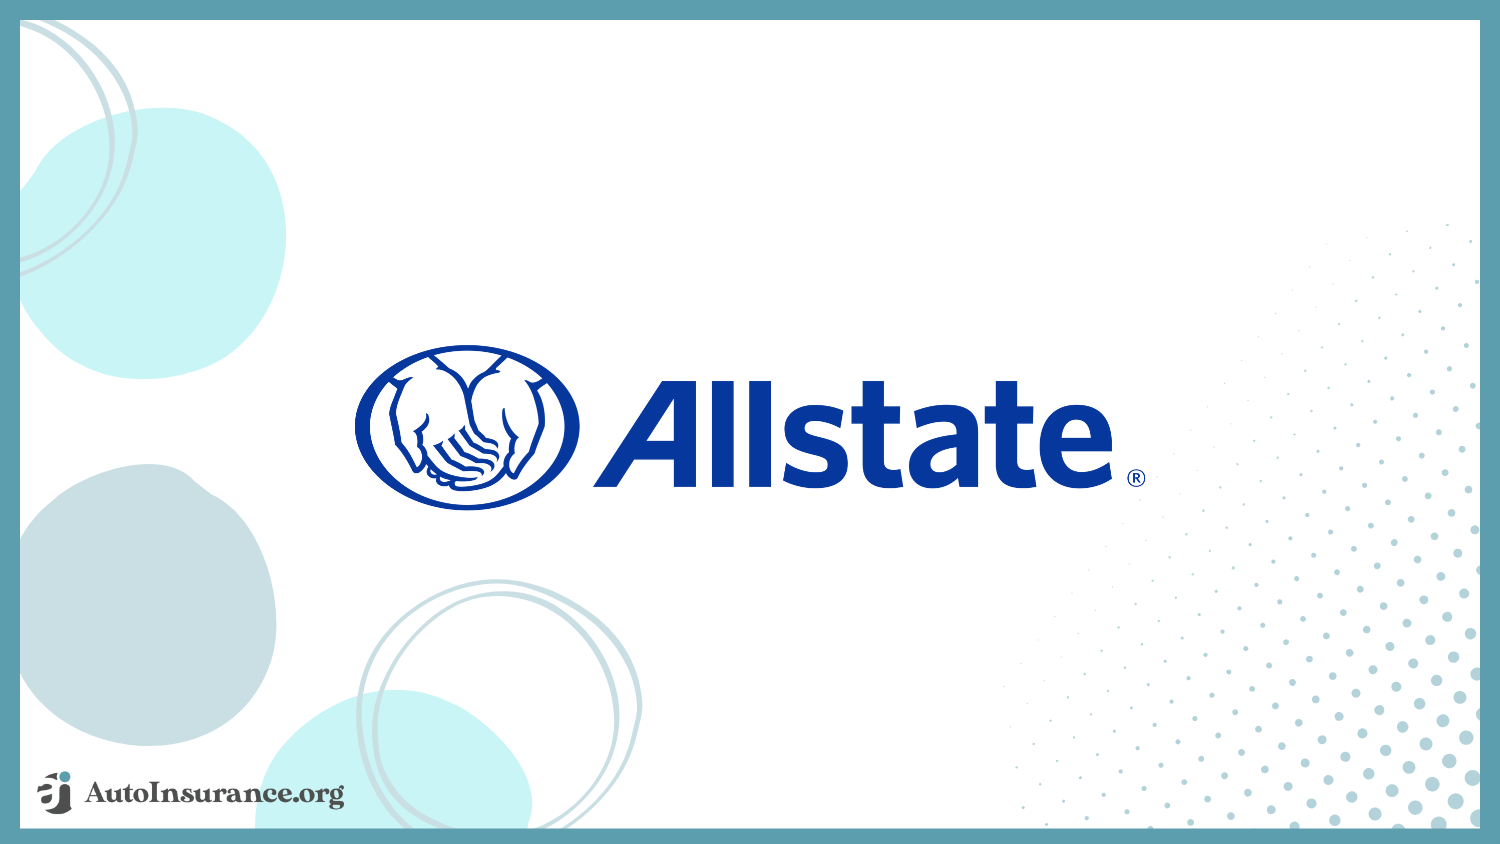 Allstate: Best Auto Insurance for Amputees